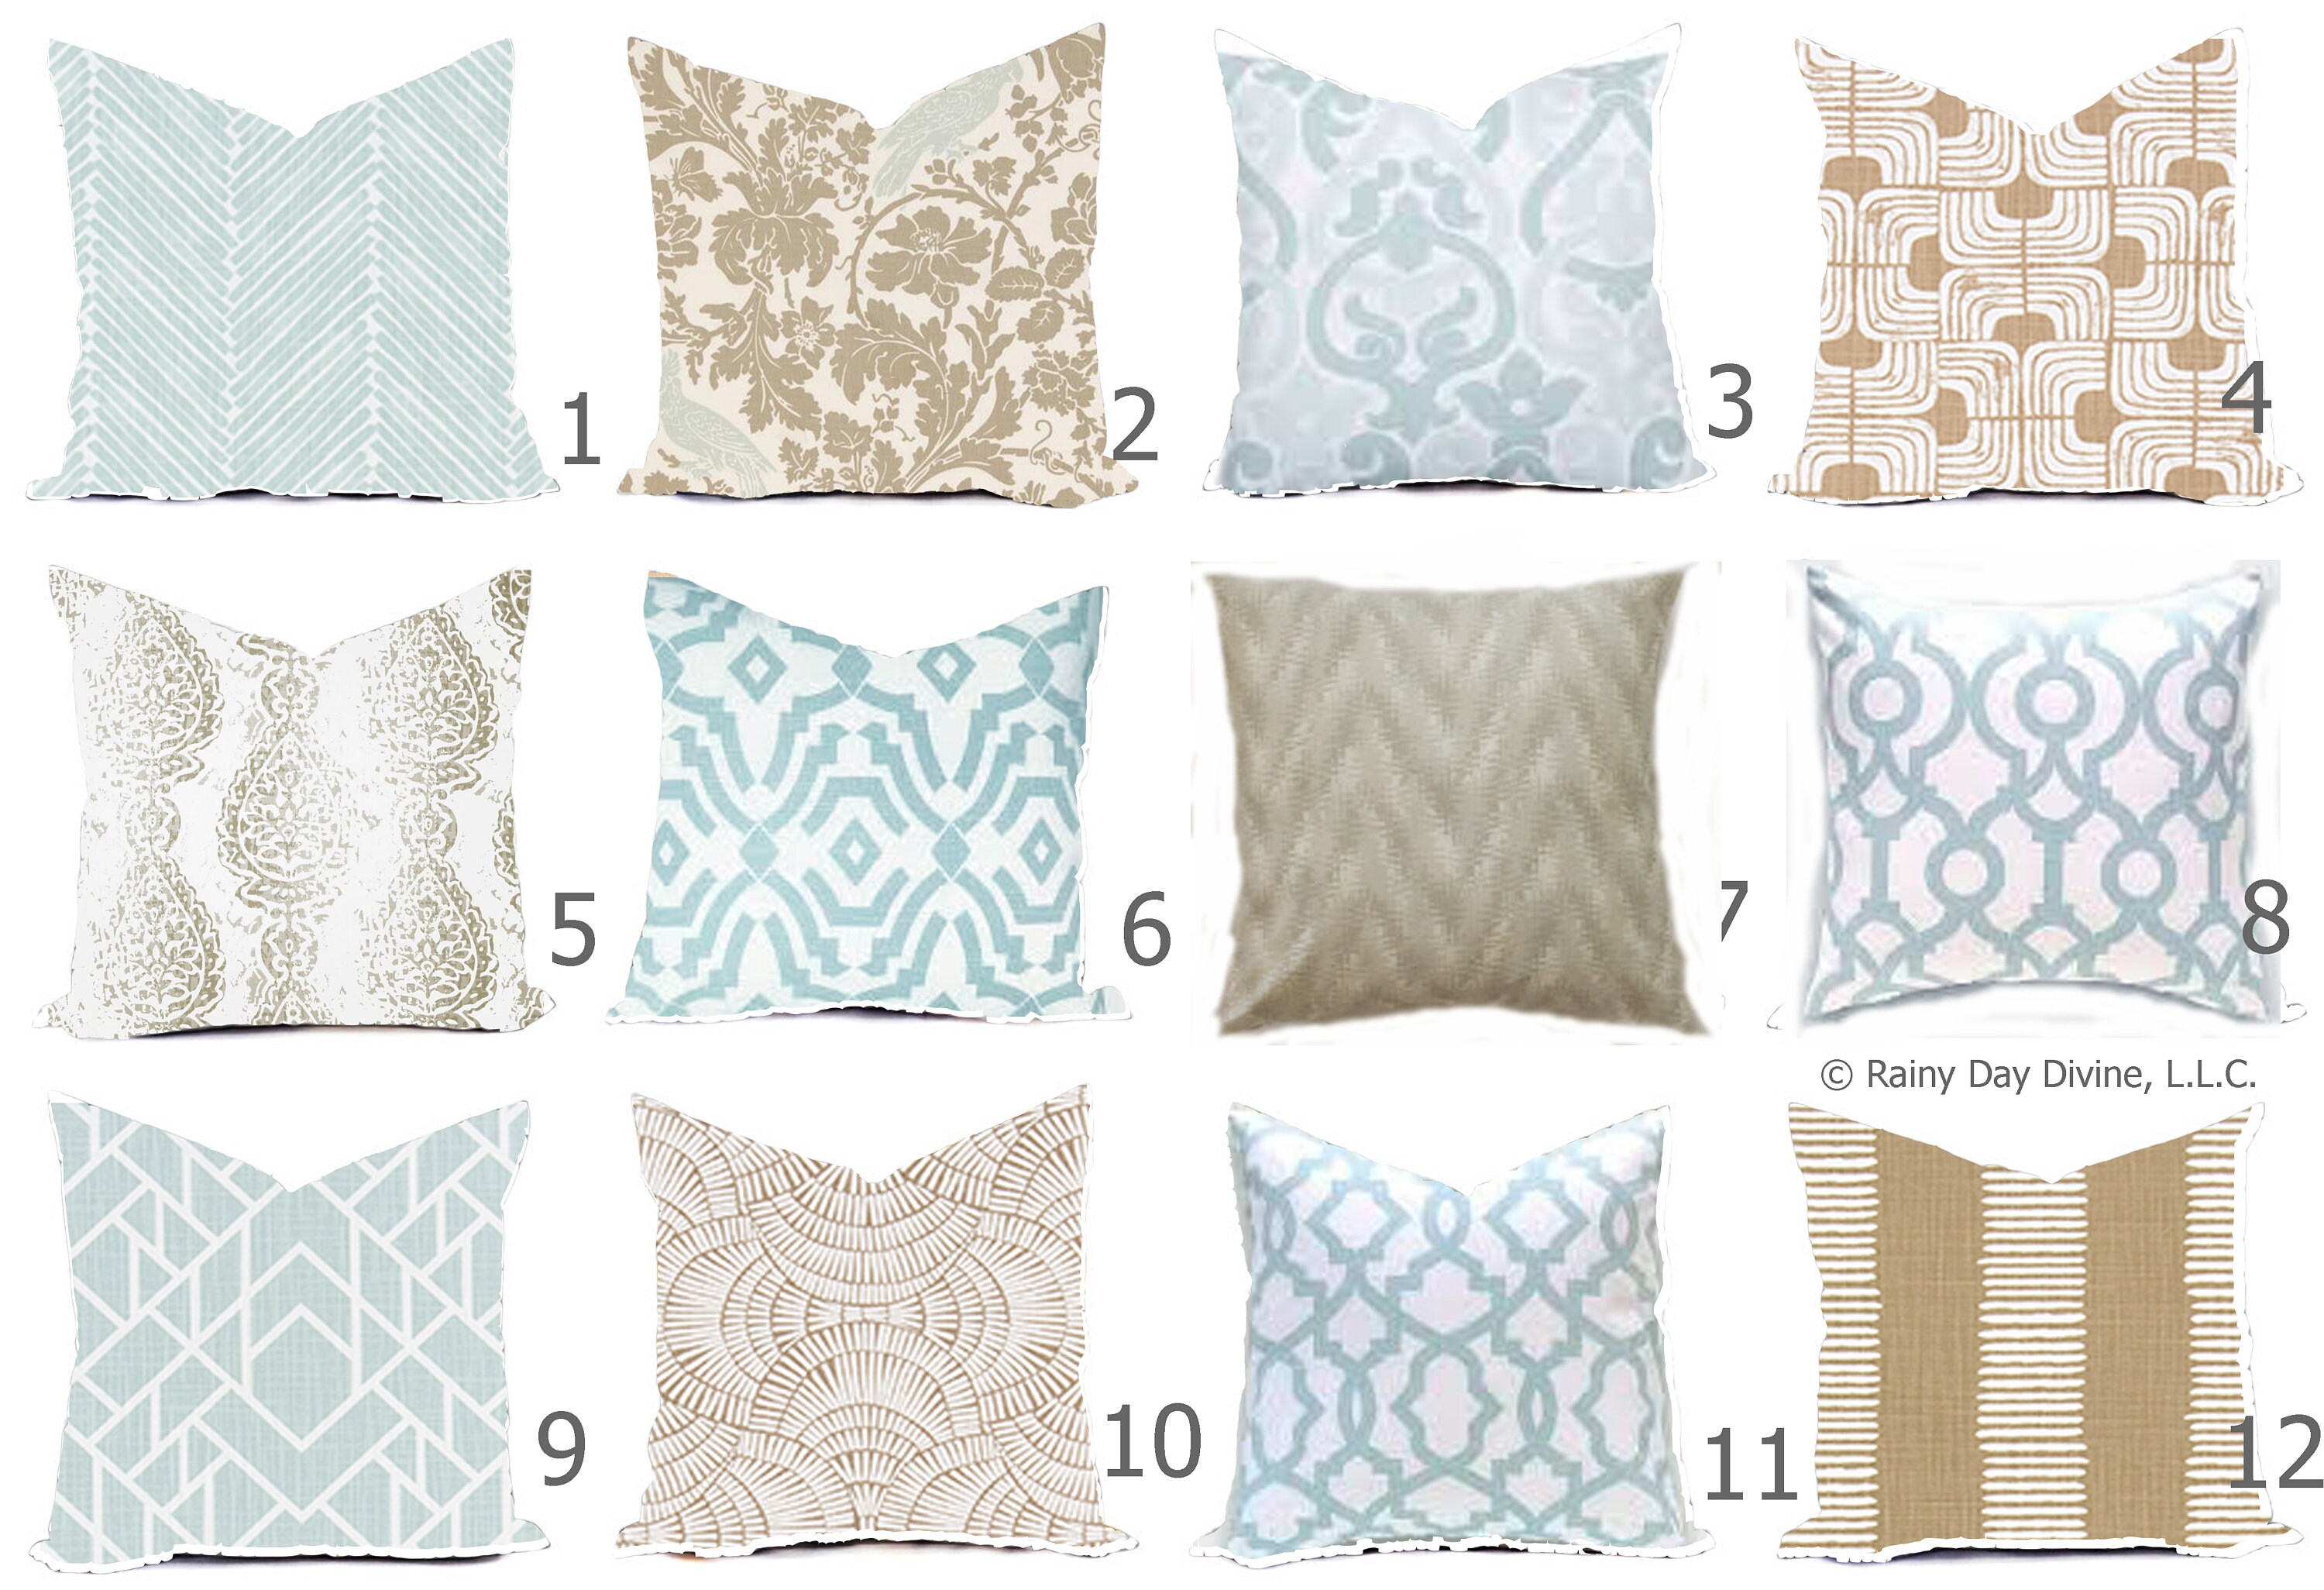 Any Size Pillow Form Insert You Need: 14x14, 16x16, 18x18, 20x20, 24x24